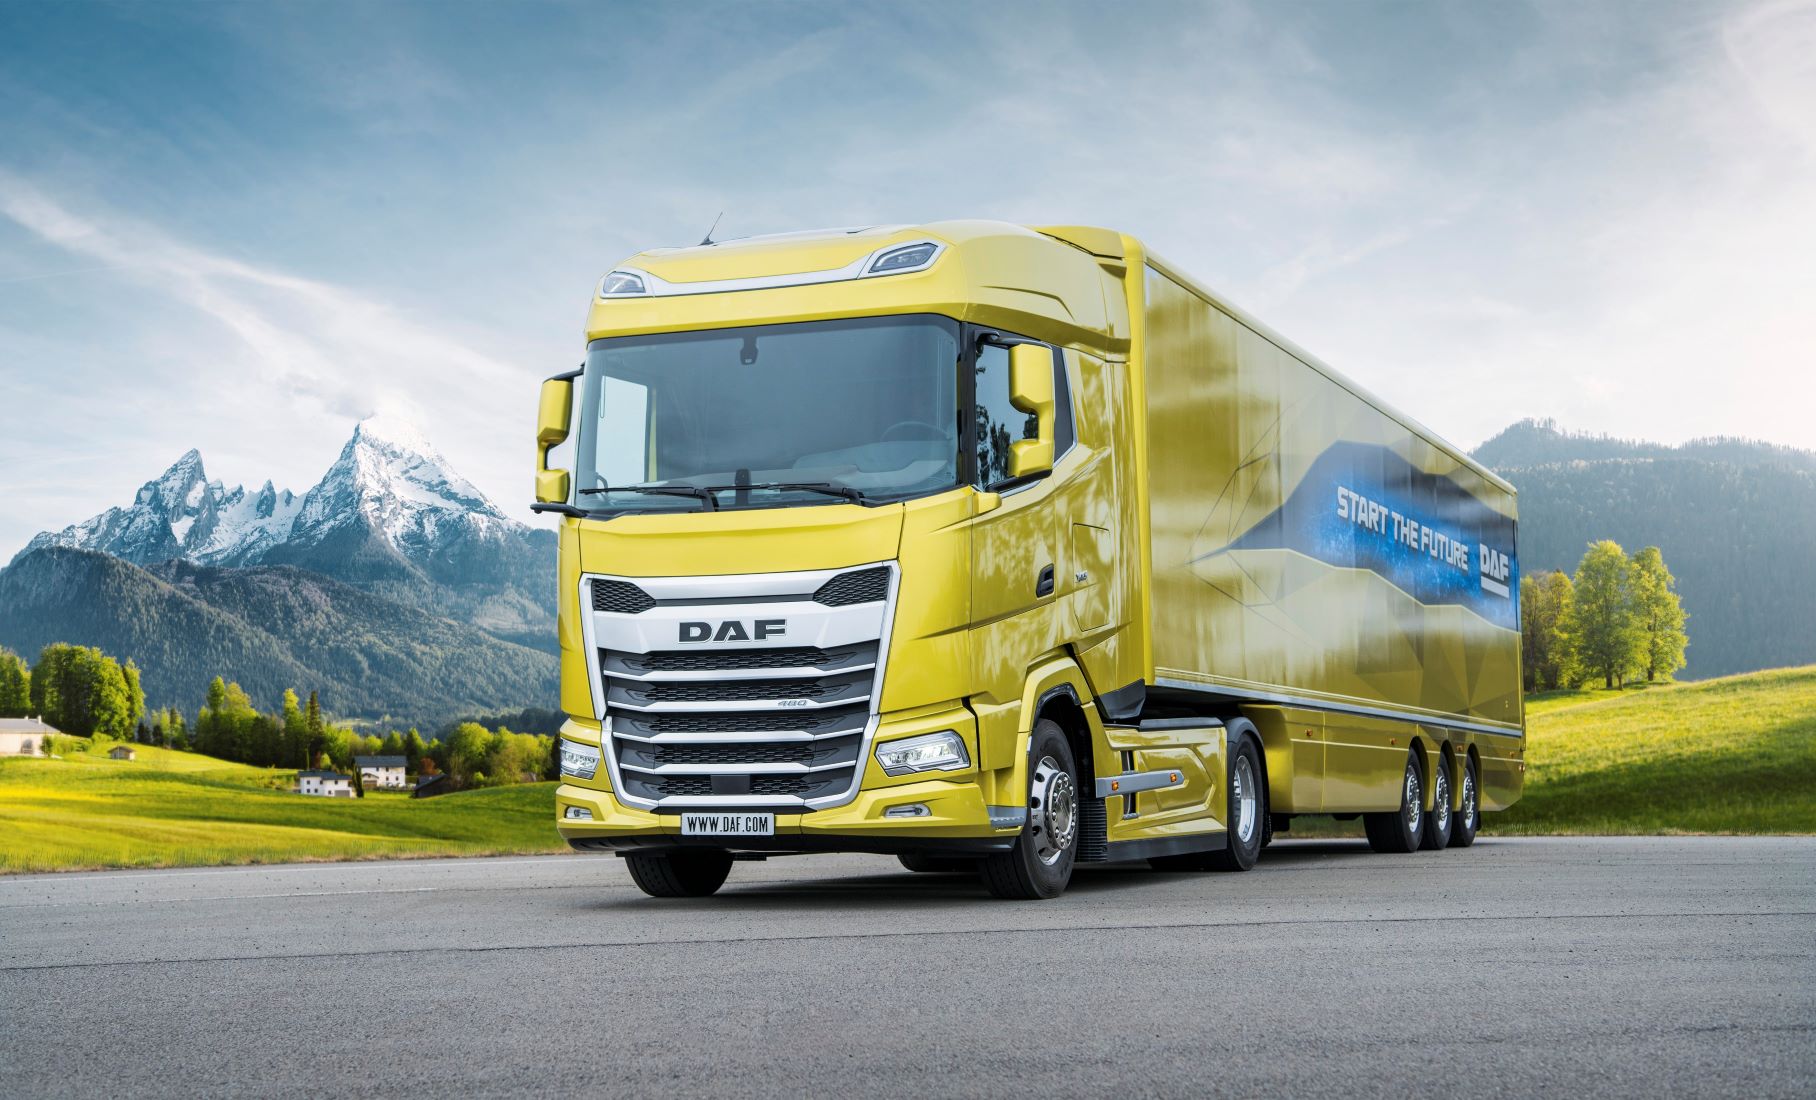 New Generation DAF in front of mountain landscape